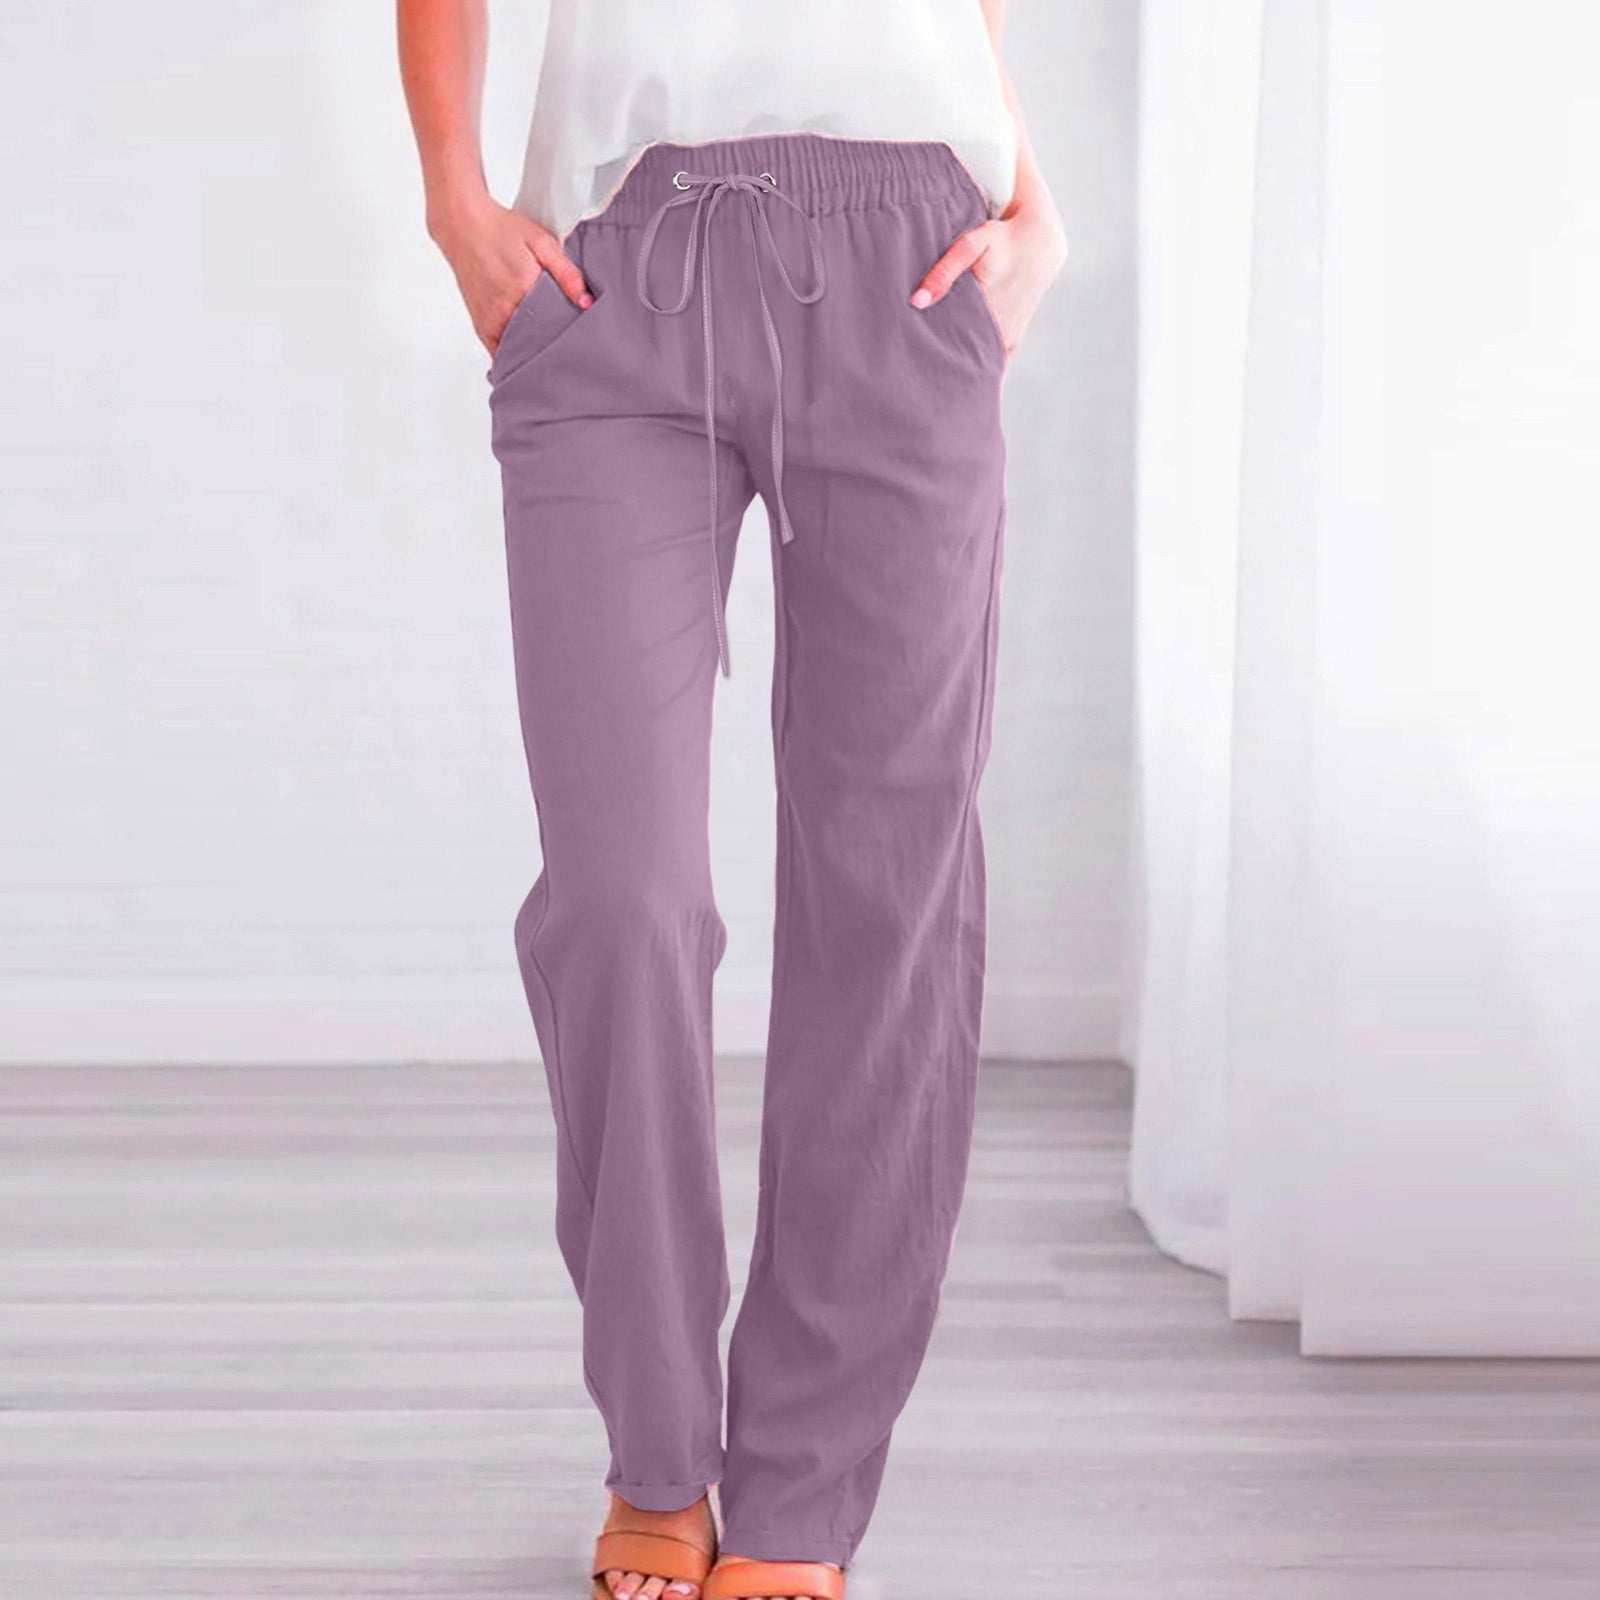 Herrnalise Linen Pants for Women Casual Loose Straight Elastic Waist Pants  with Pockets